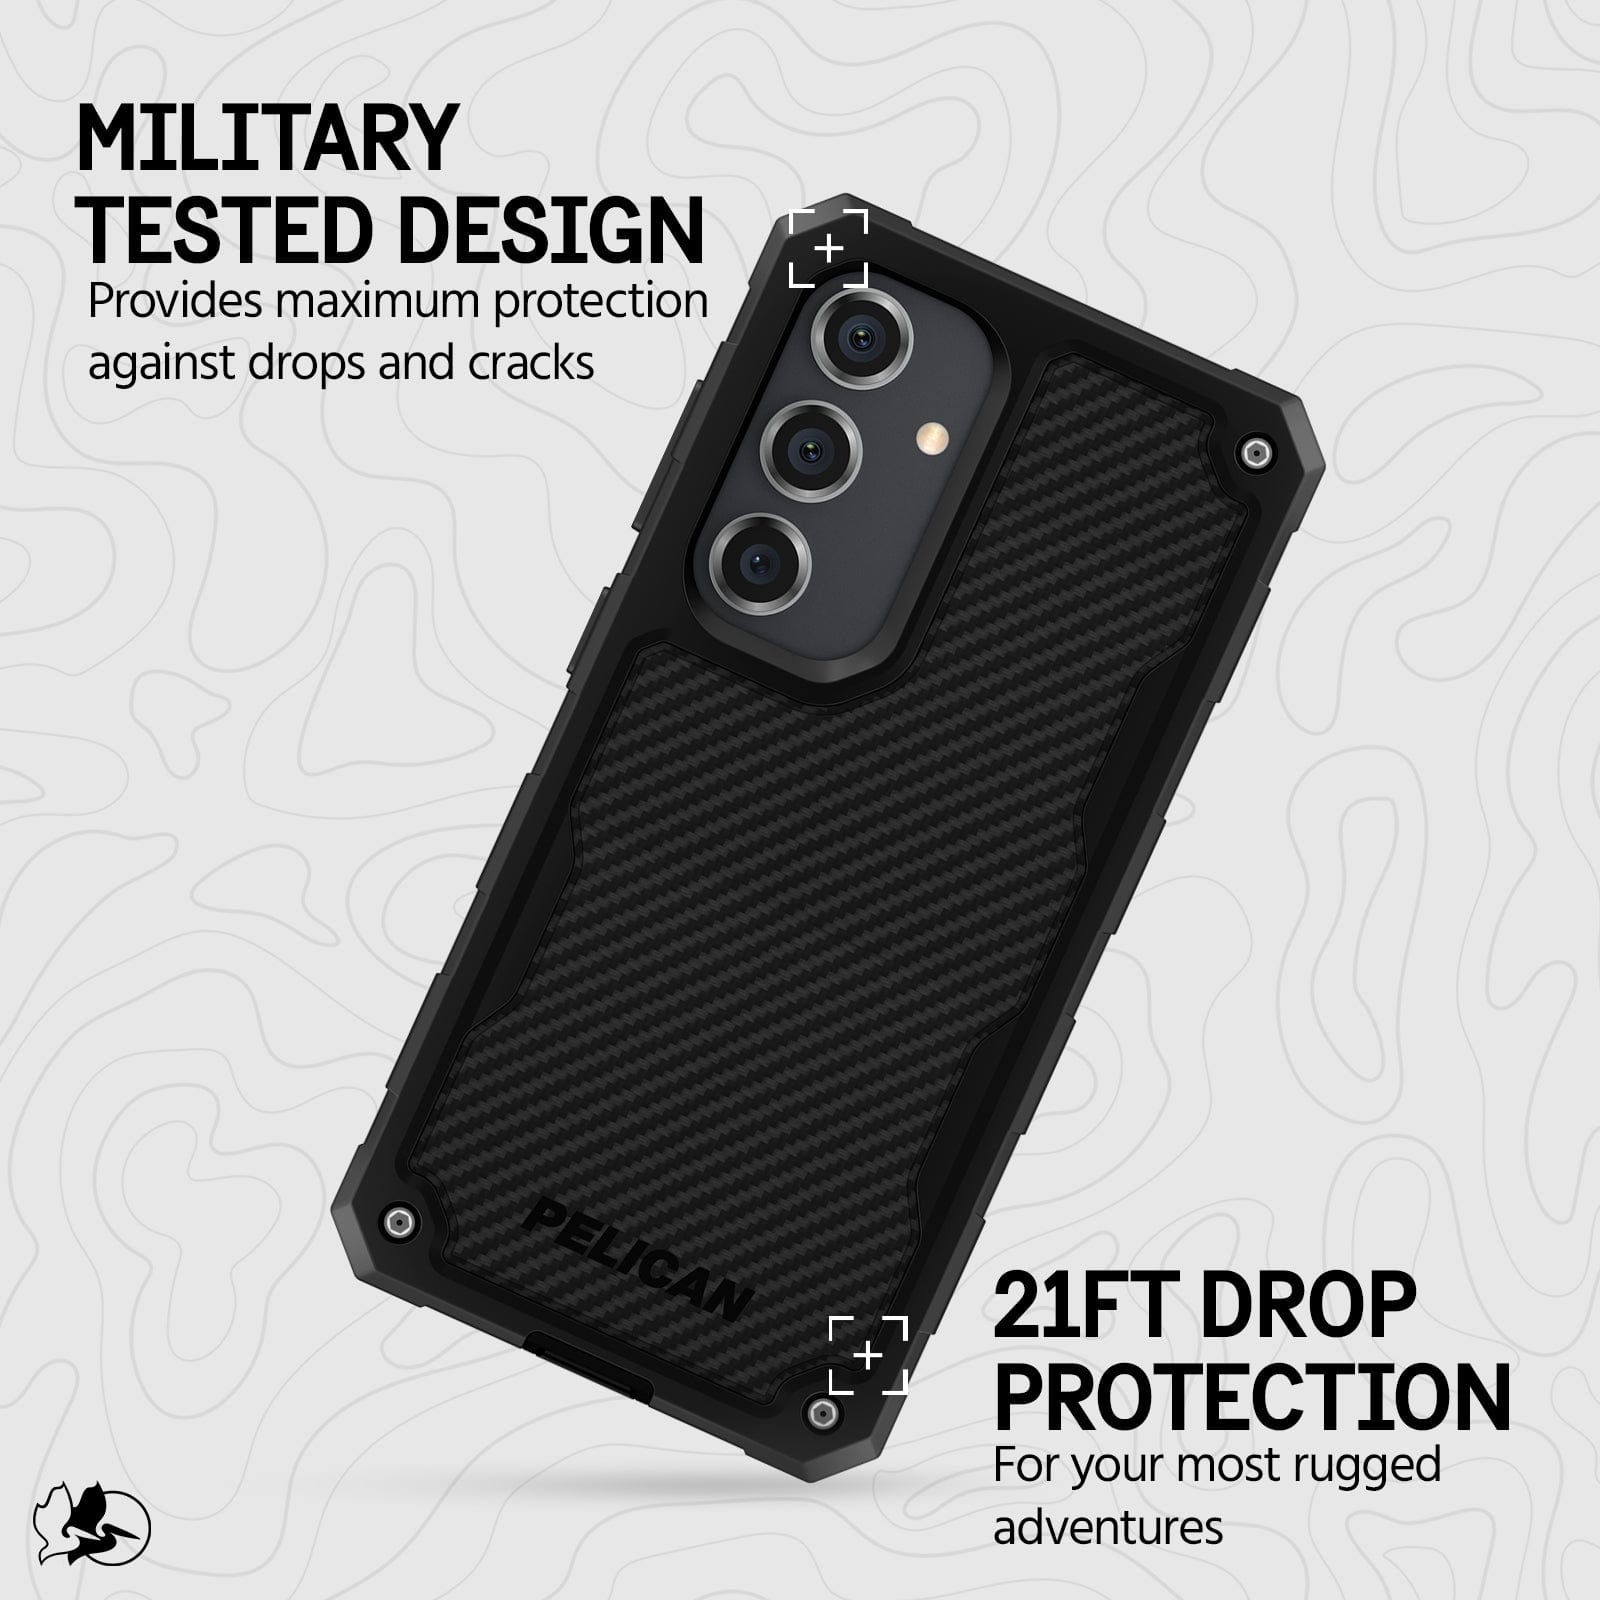 MILITARY TESTED DESIGN. PROVIDES MAXIMUM PROTECTION AGAINST DROPS AND CRACKS. 21FT DROP PROTECTION FOR YOUR MOST RUGGED ADVENTURES